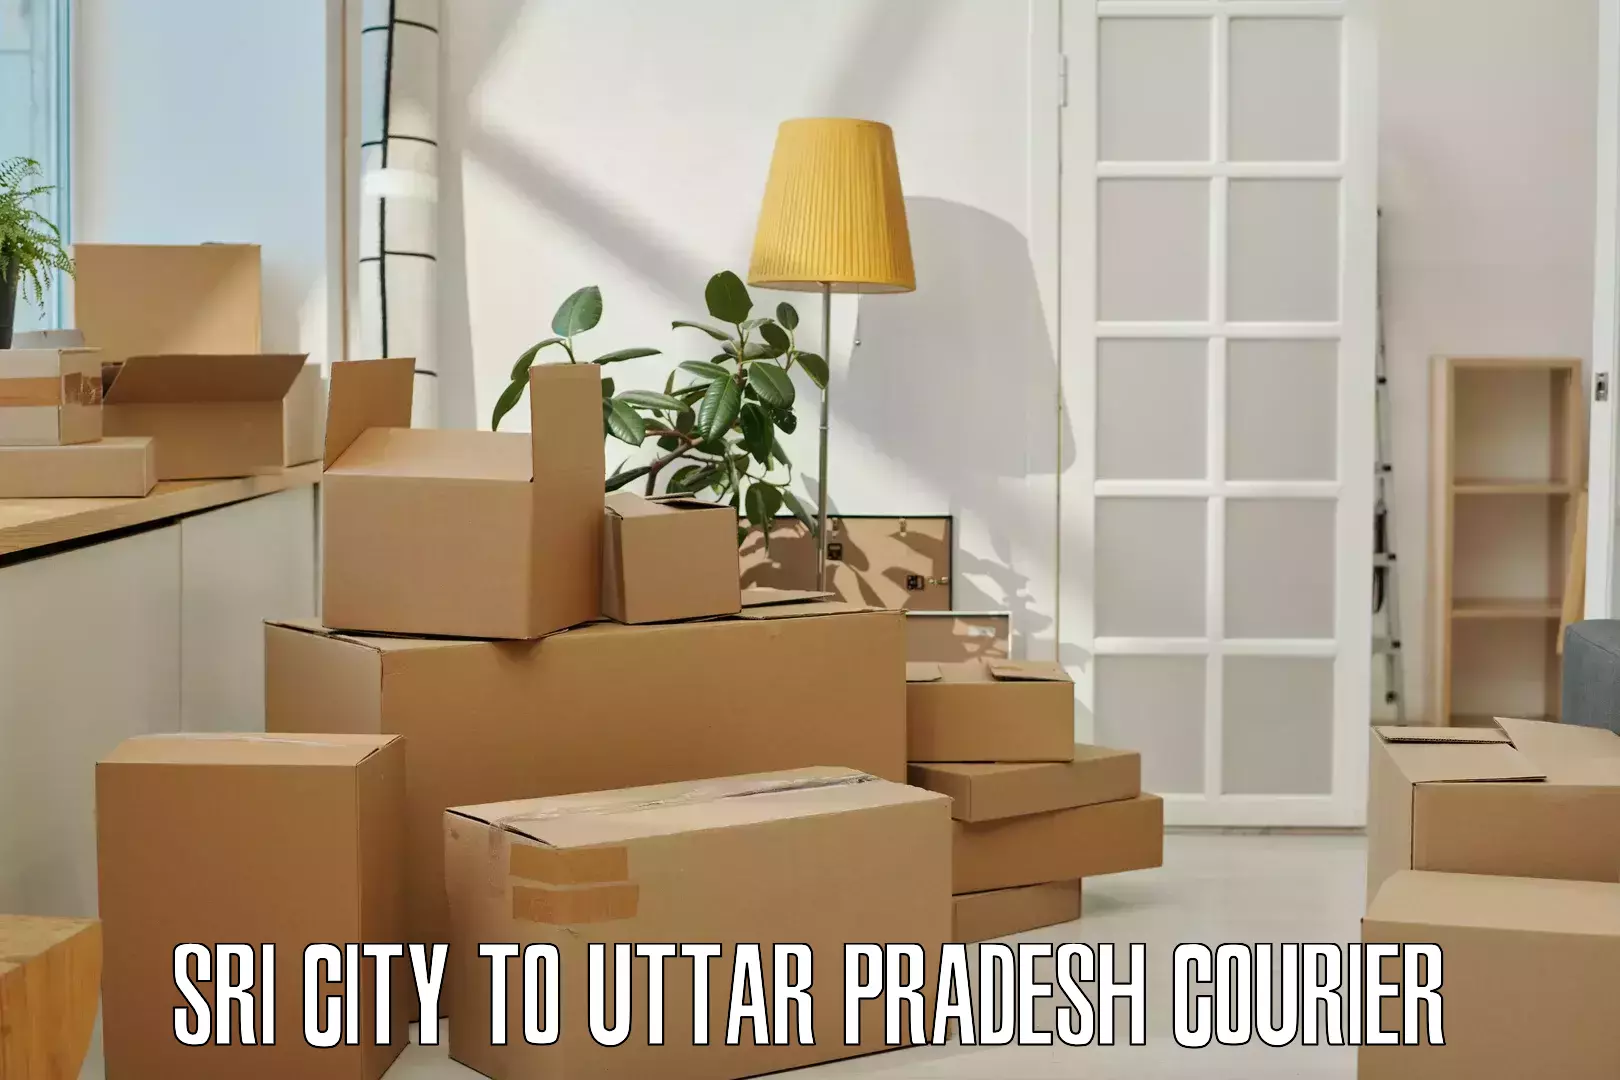 Easy access courier services Sri City to Dhaurahara